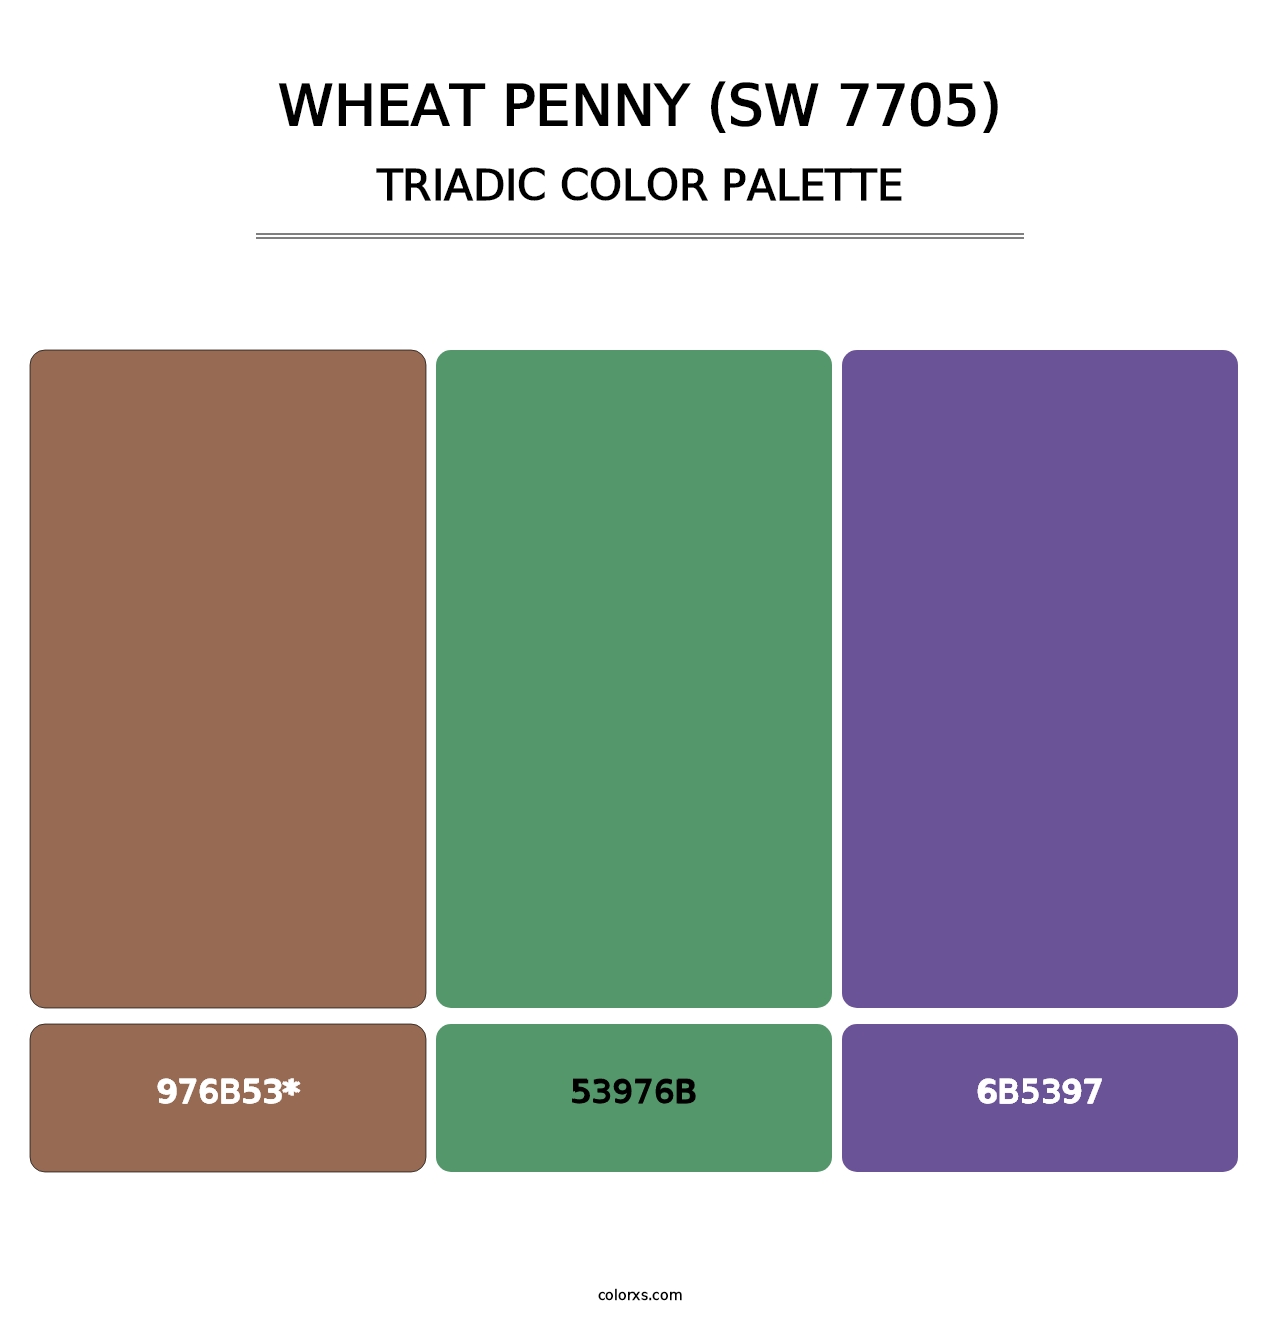 Wheat Penny (SW 7705) - Triadic Color Palette